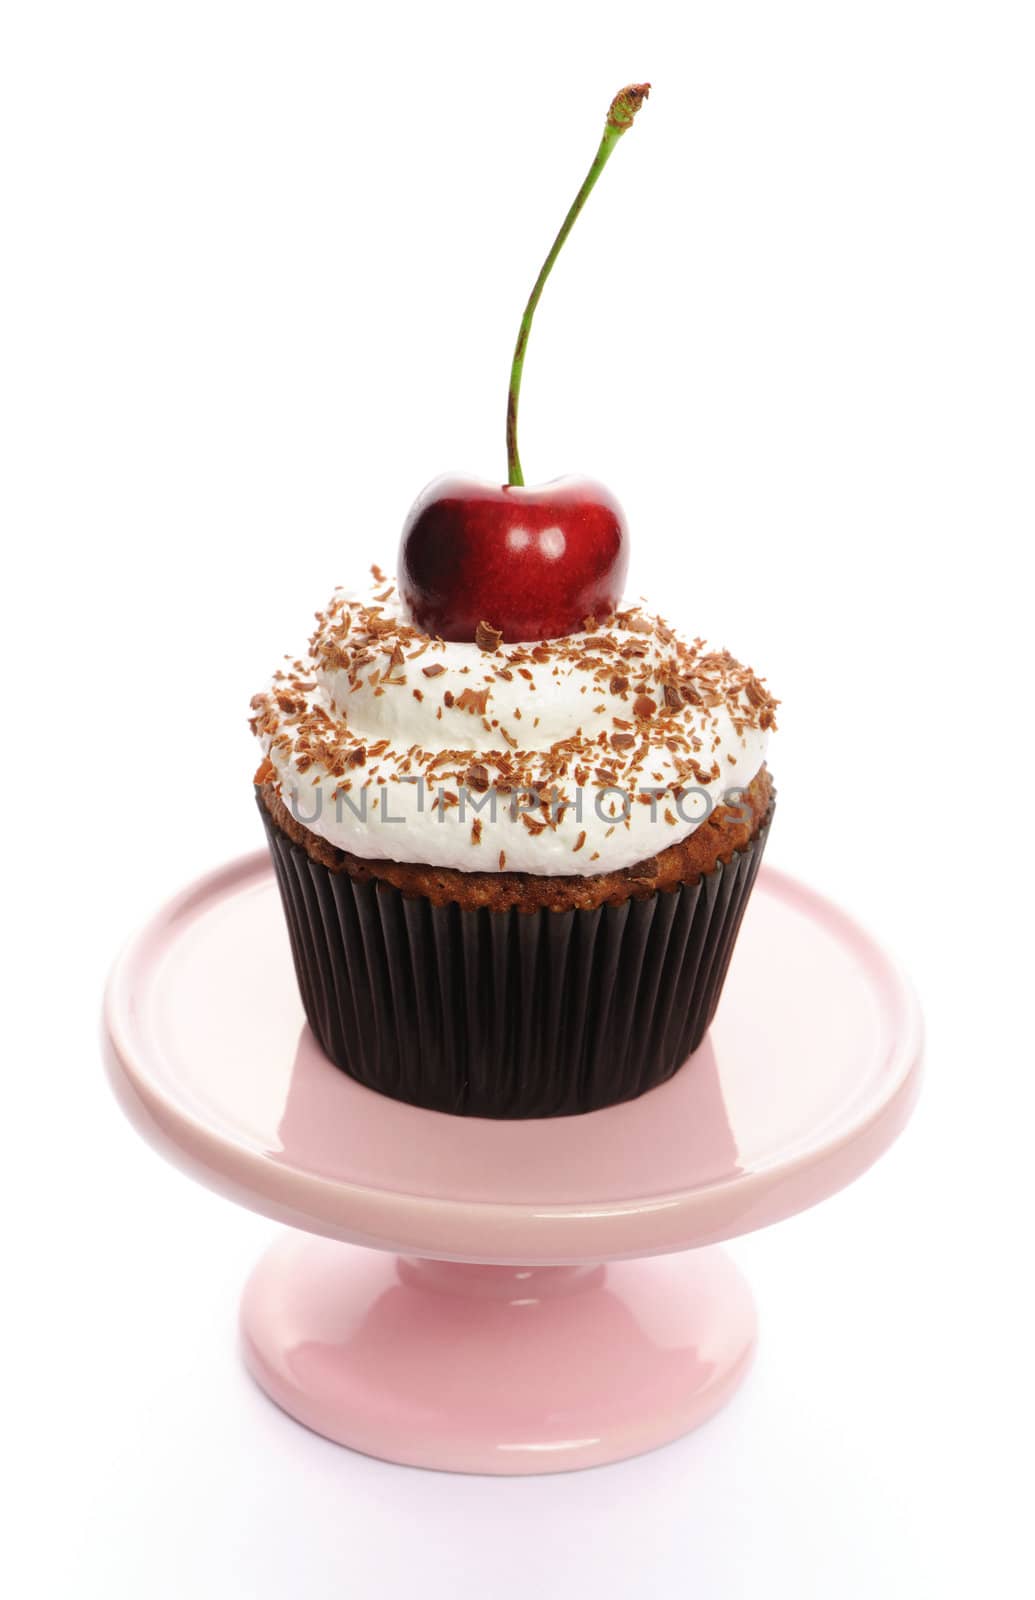 Cupcake with whipped cream and cherry isolated on white